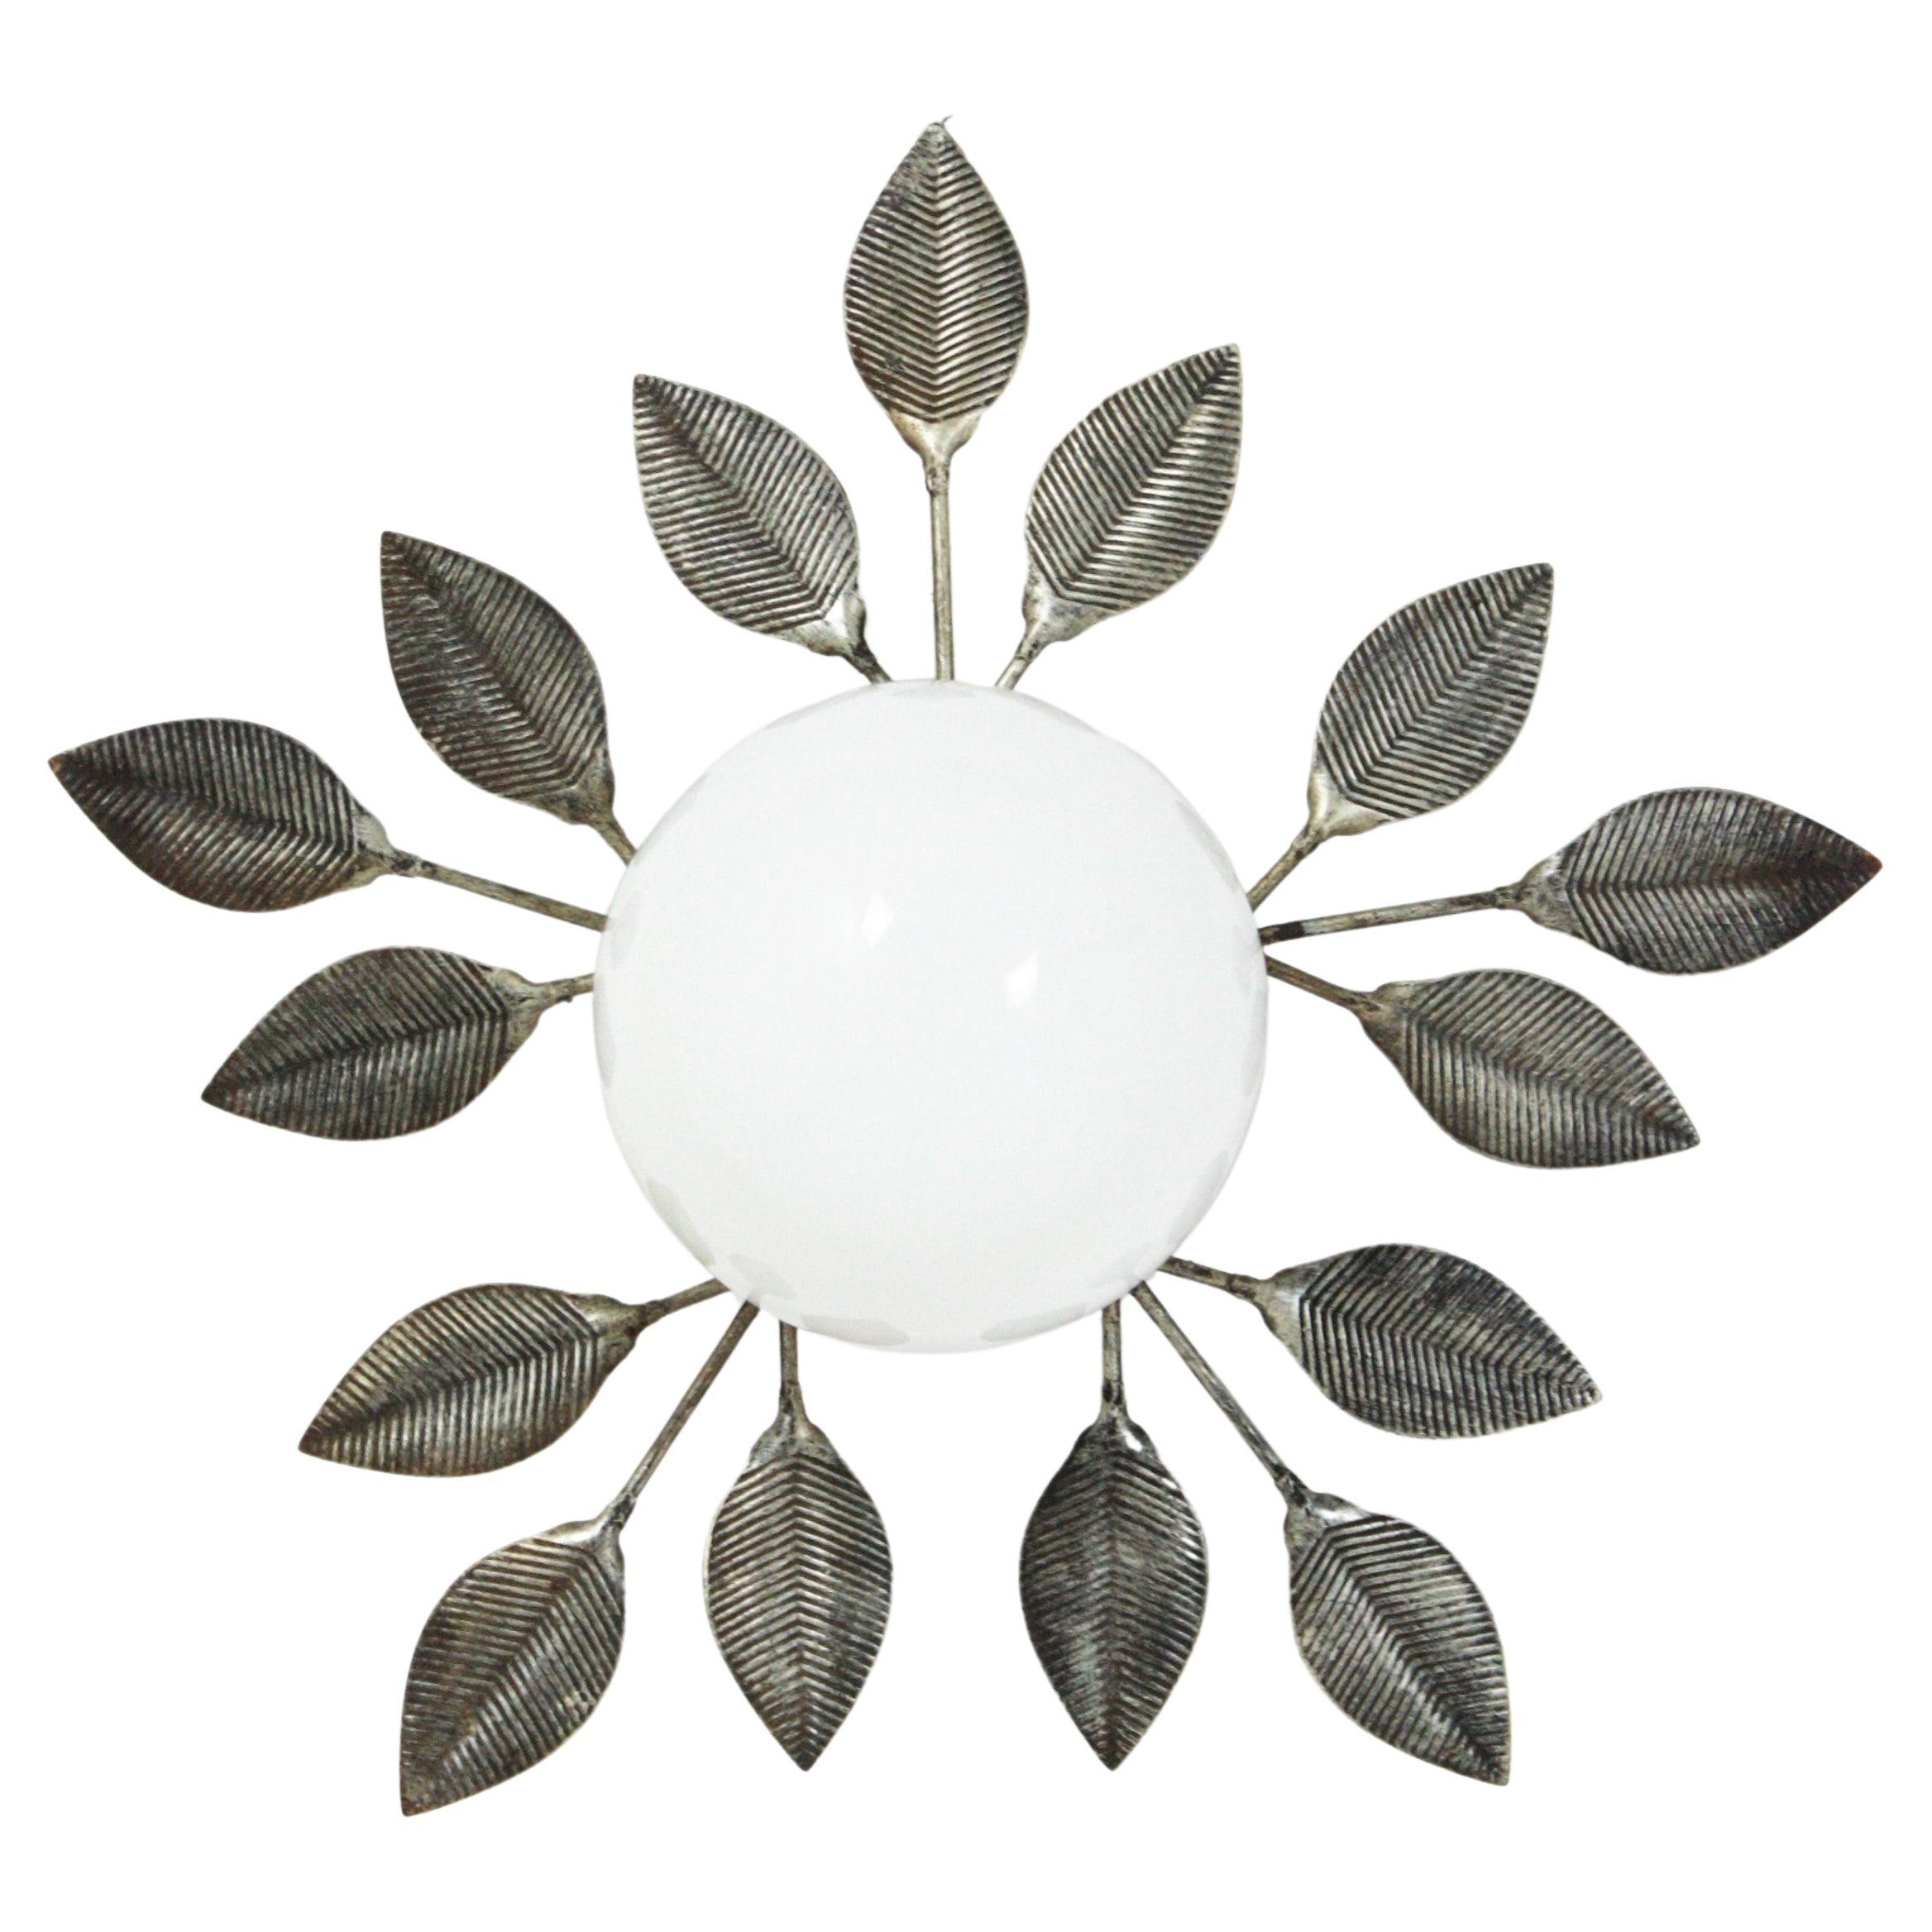 Spanish Foliage Silvered iron Light Fixture with Milk Glass Globe, 1960s For Sale